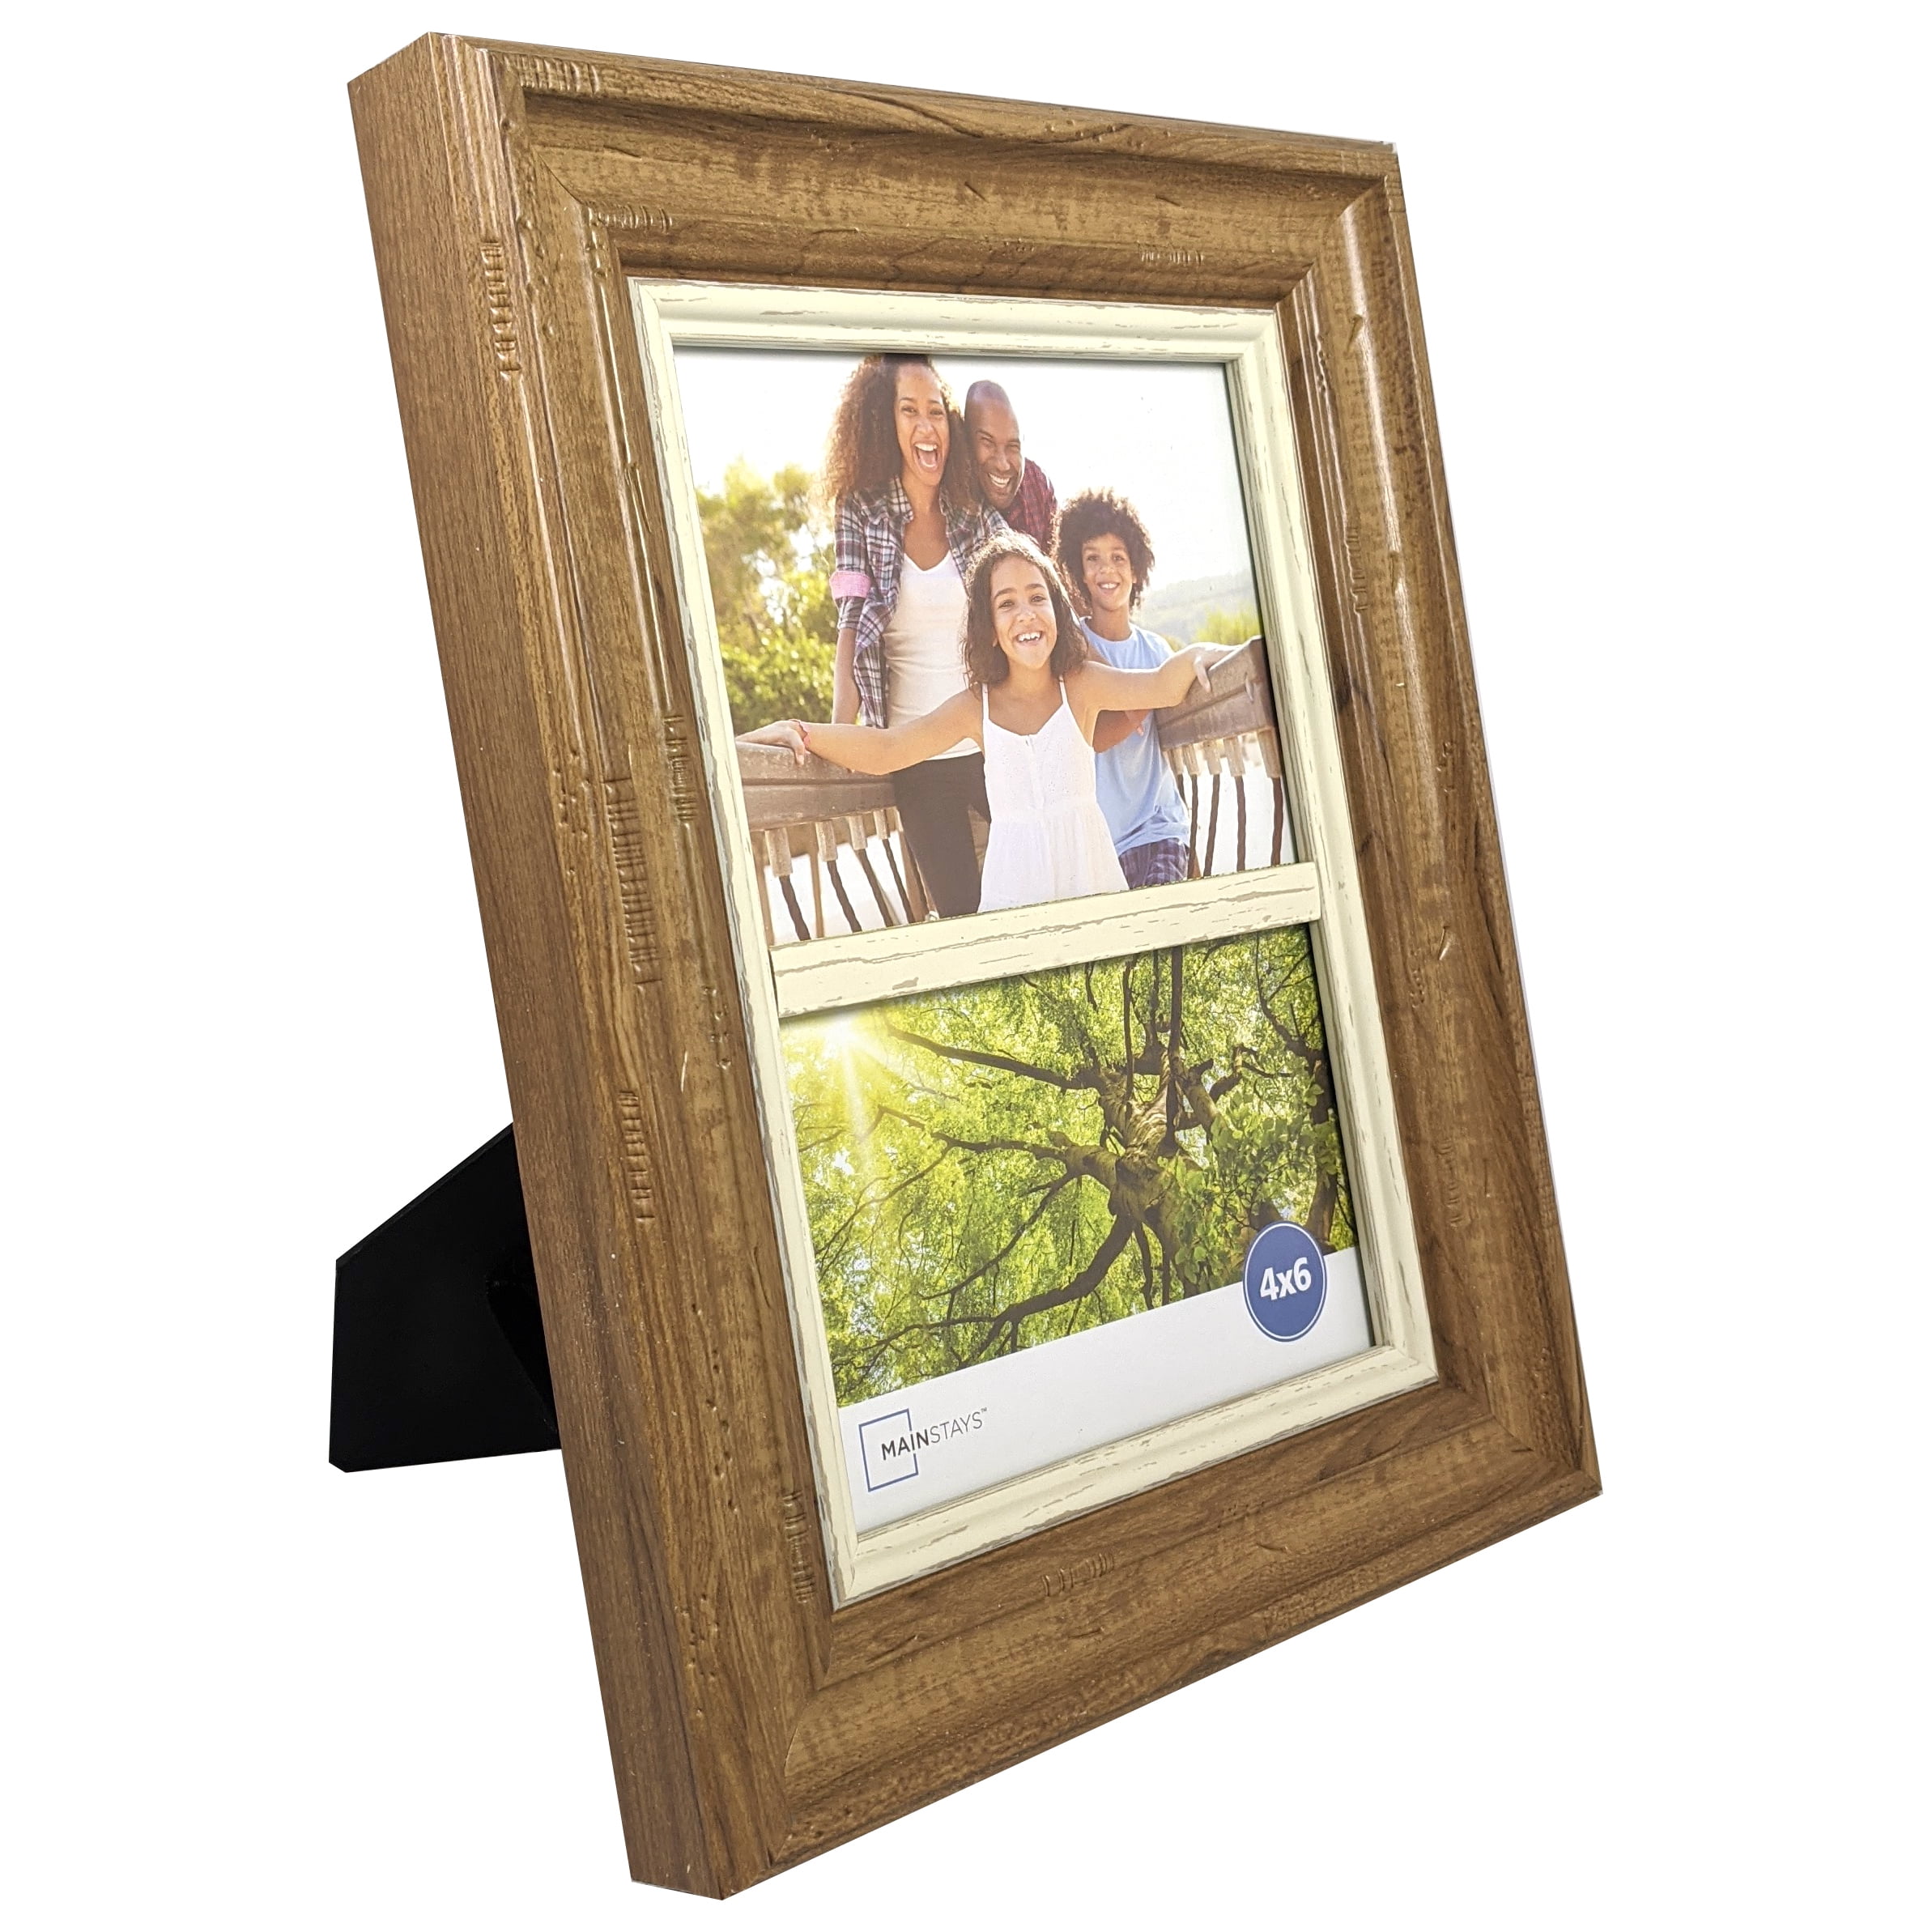 4 x 6 Natural Frame with Stand Brown - Project 62™